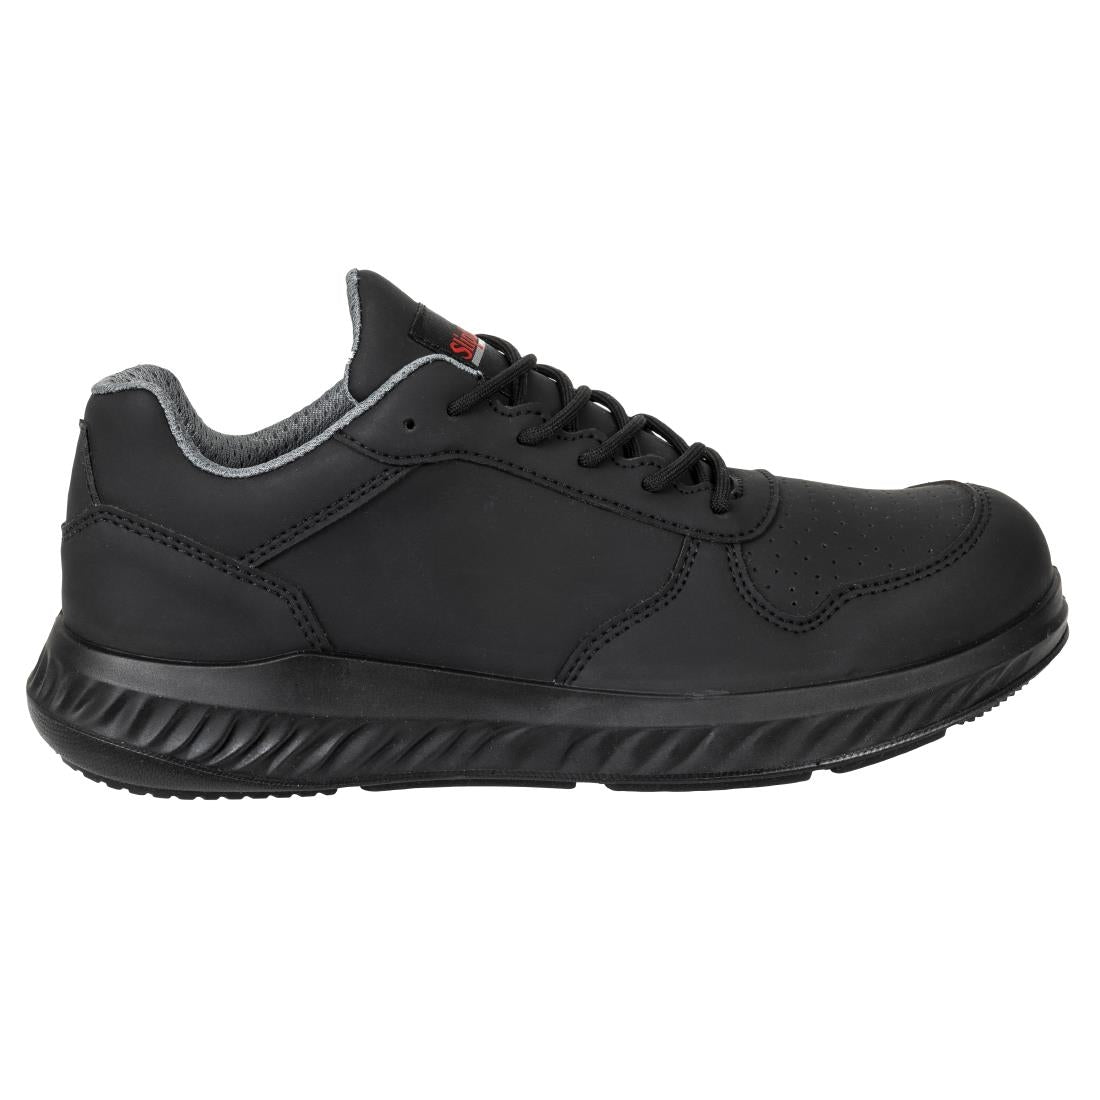 BA063-39 Slipbuster Recycled Microfibre Trainers Matte Black 39 JD Catering Equipment Solutions Ltd